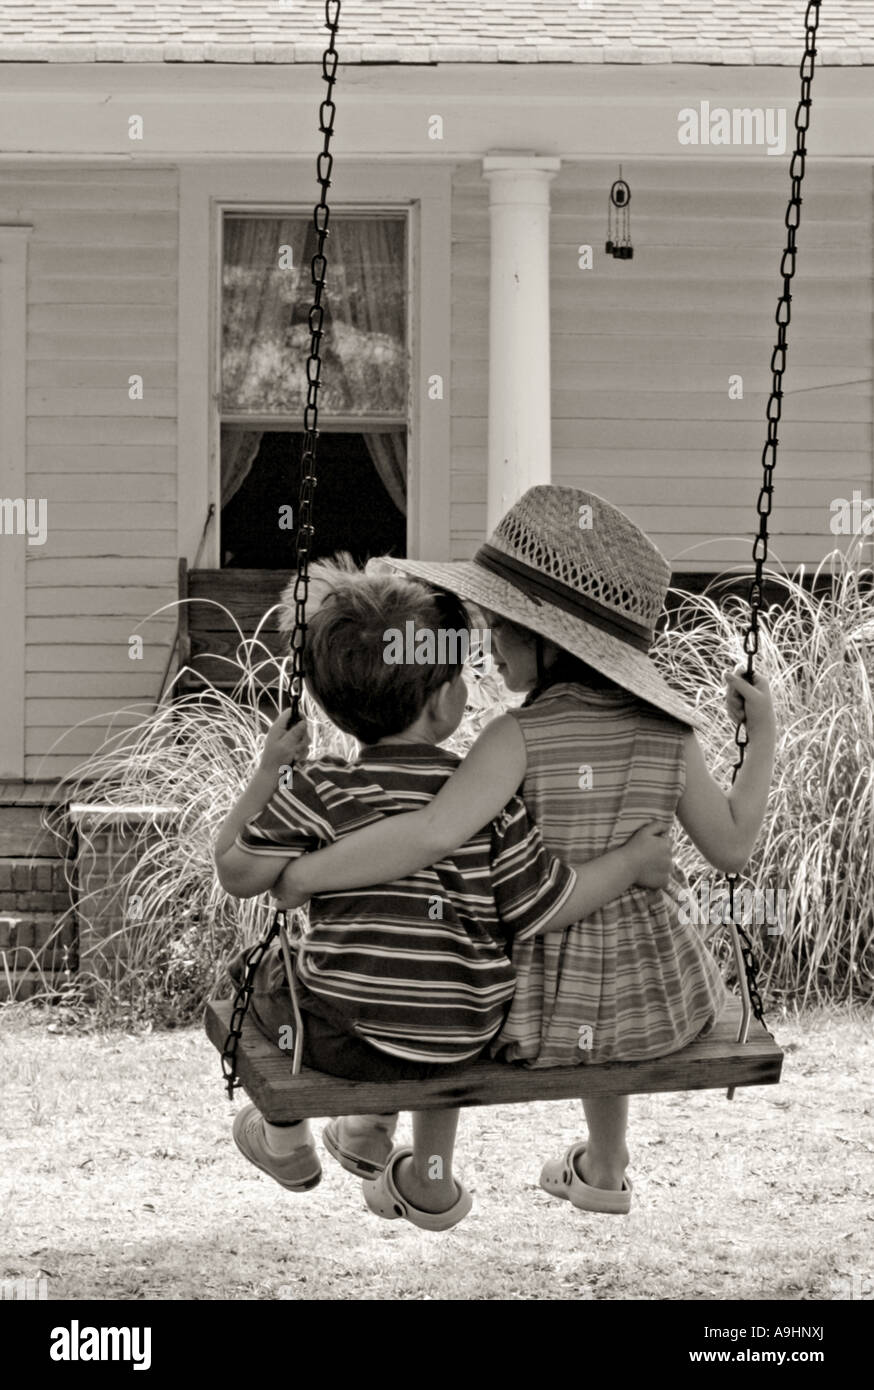 SOUTH CAROLINA YORK Brother and sister with their arms around each other swinging on an old fashioned tree swing Stock Photo